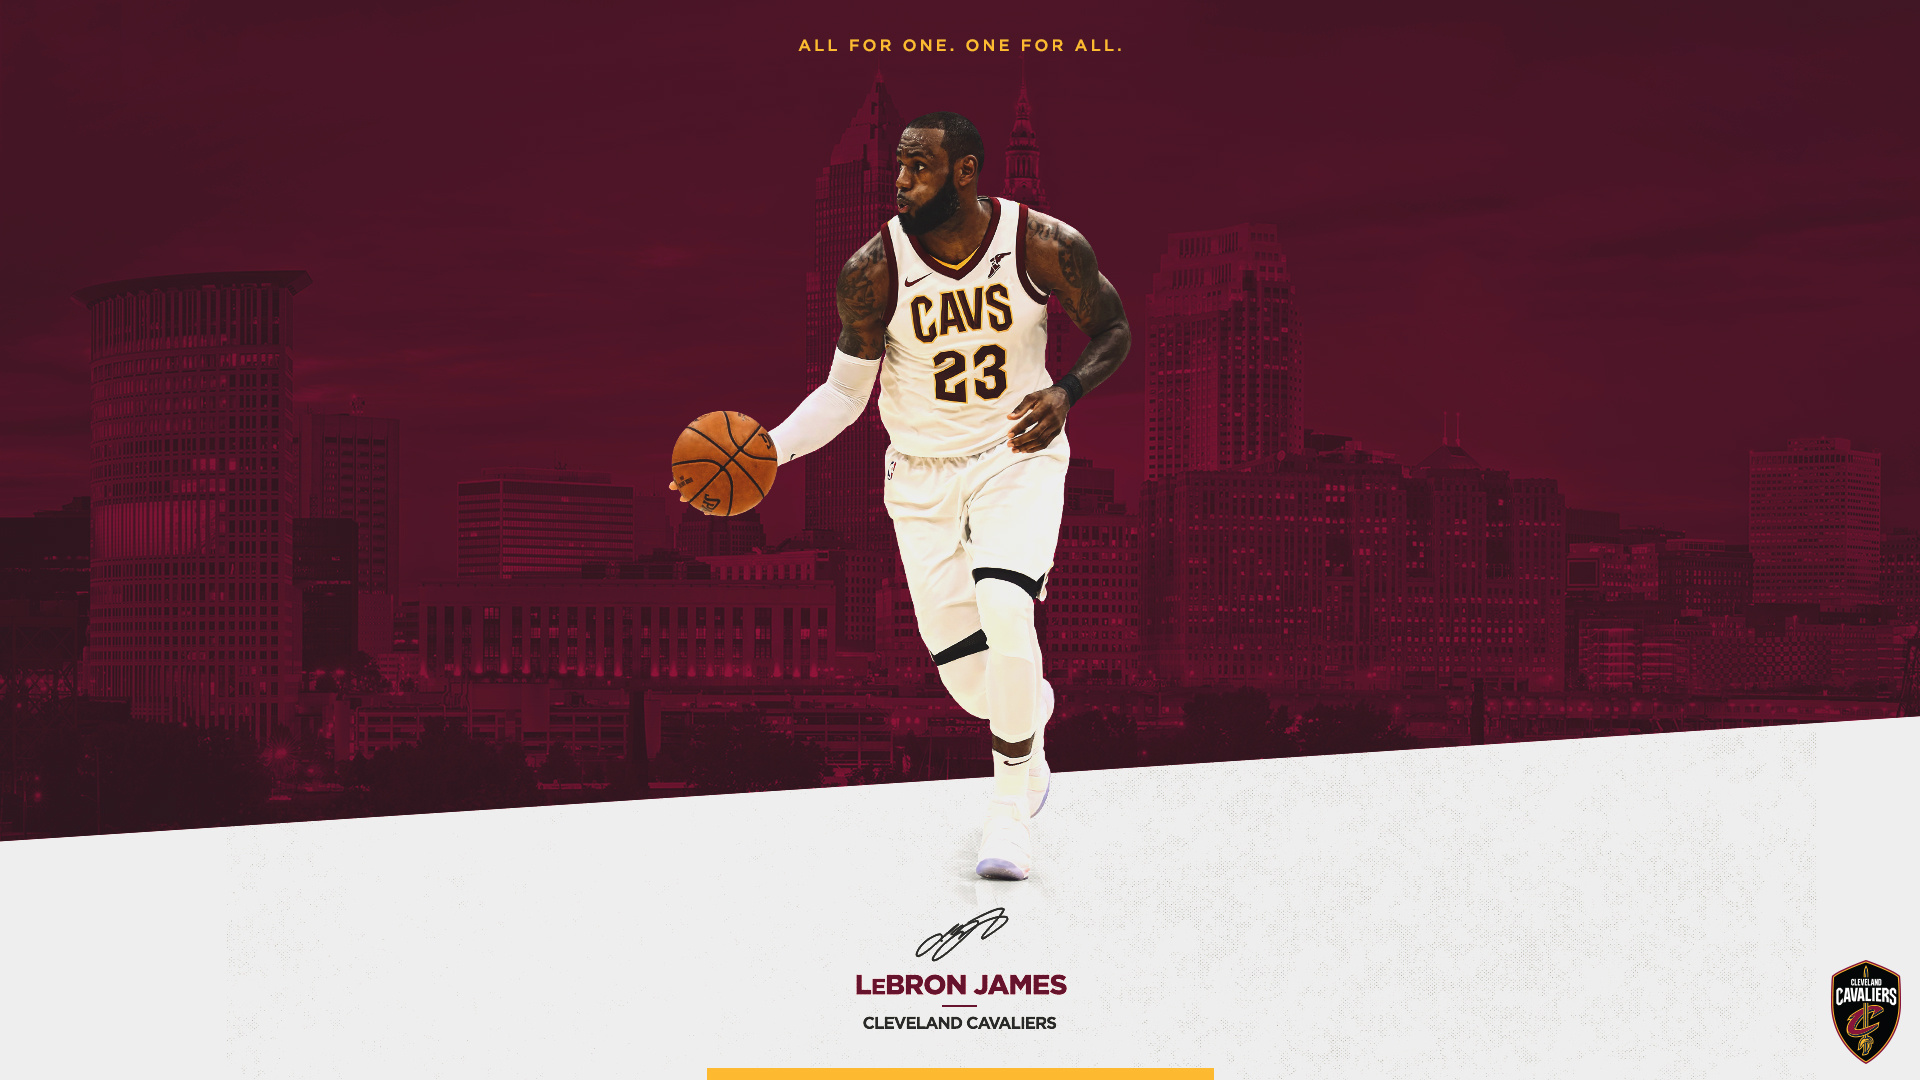 Cleveland Cavaliers: The team selected future NBA MVP LeBron James in the 2003 NBA draft. 1920x1080 Full HD Background.